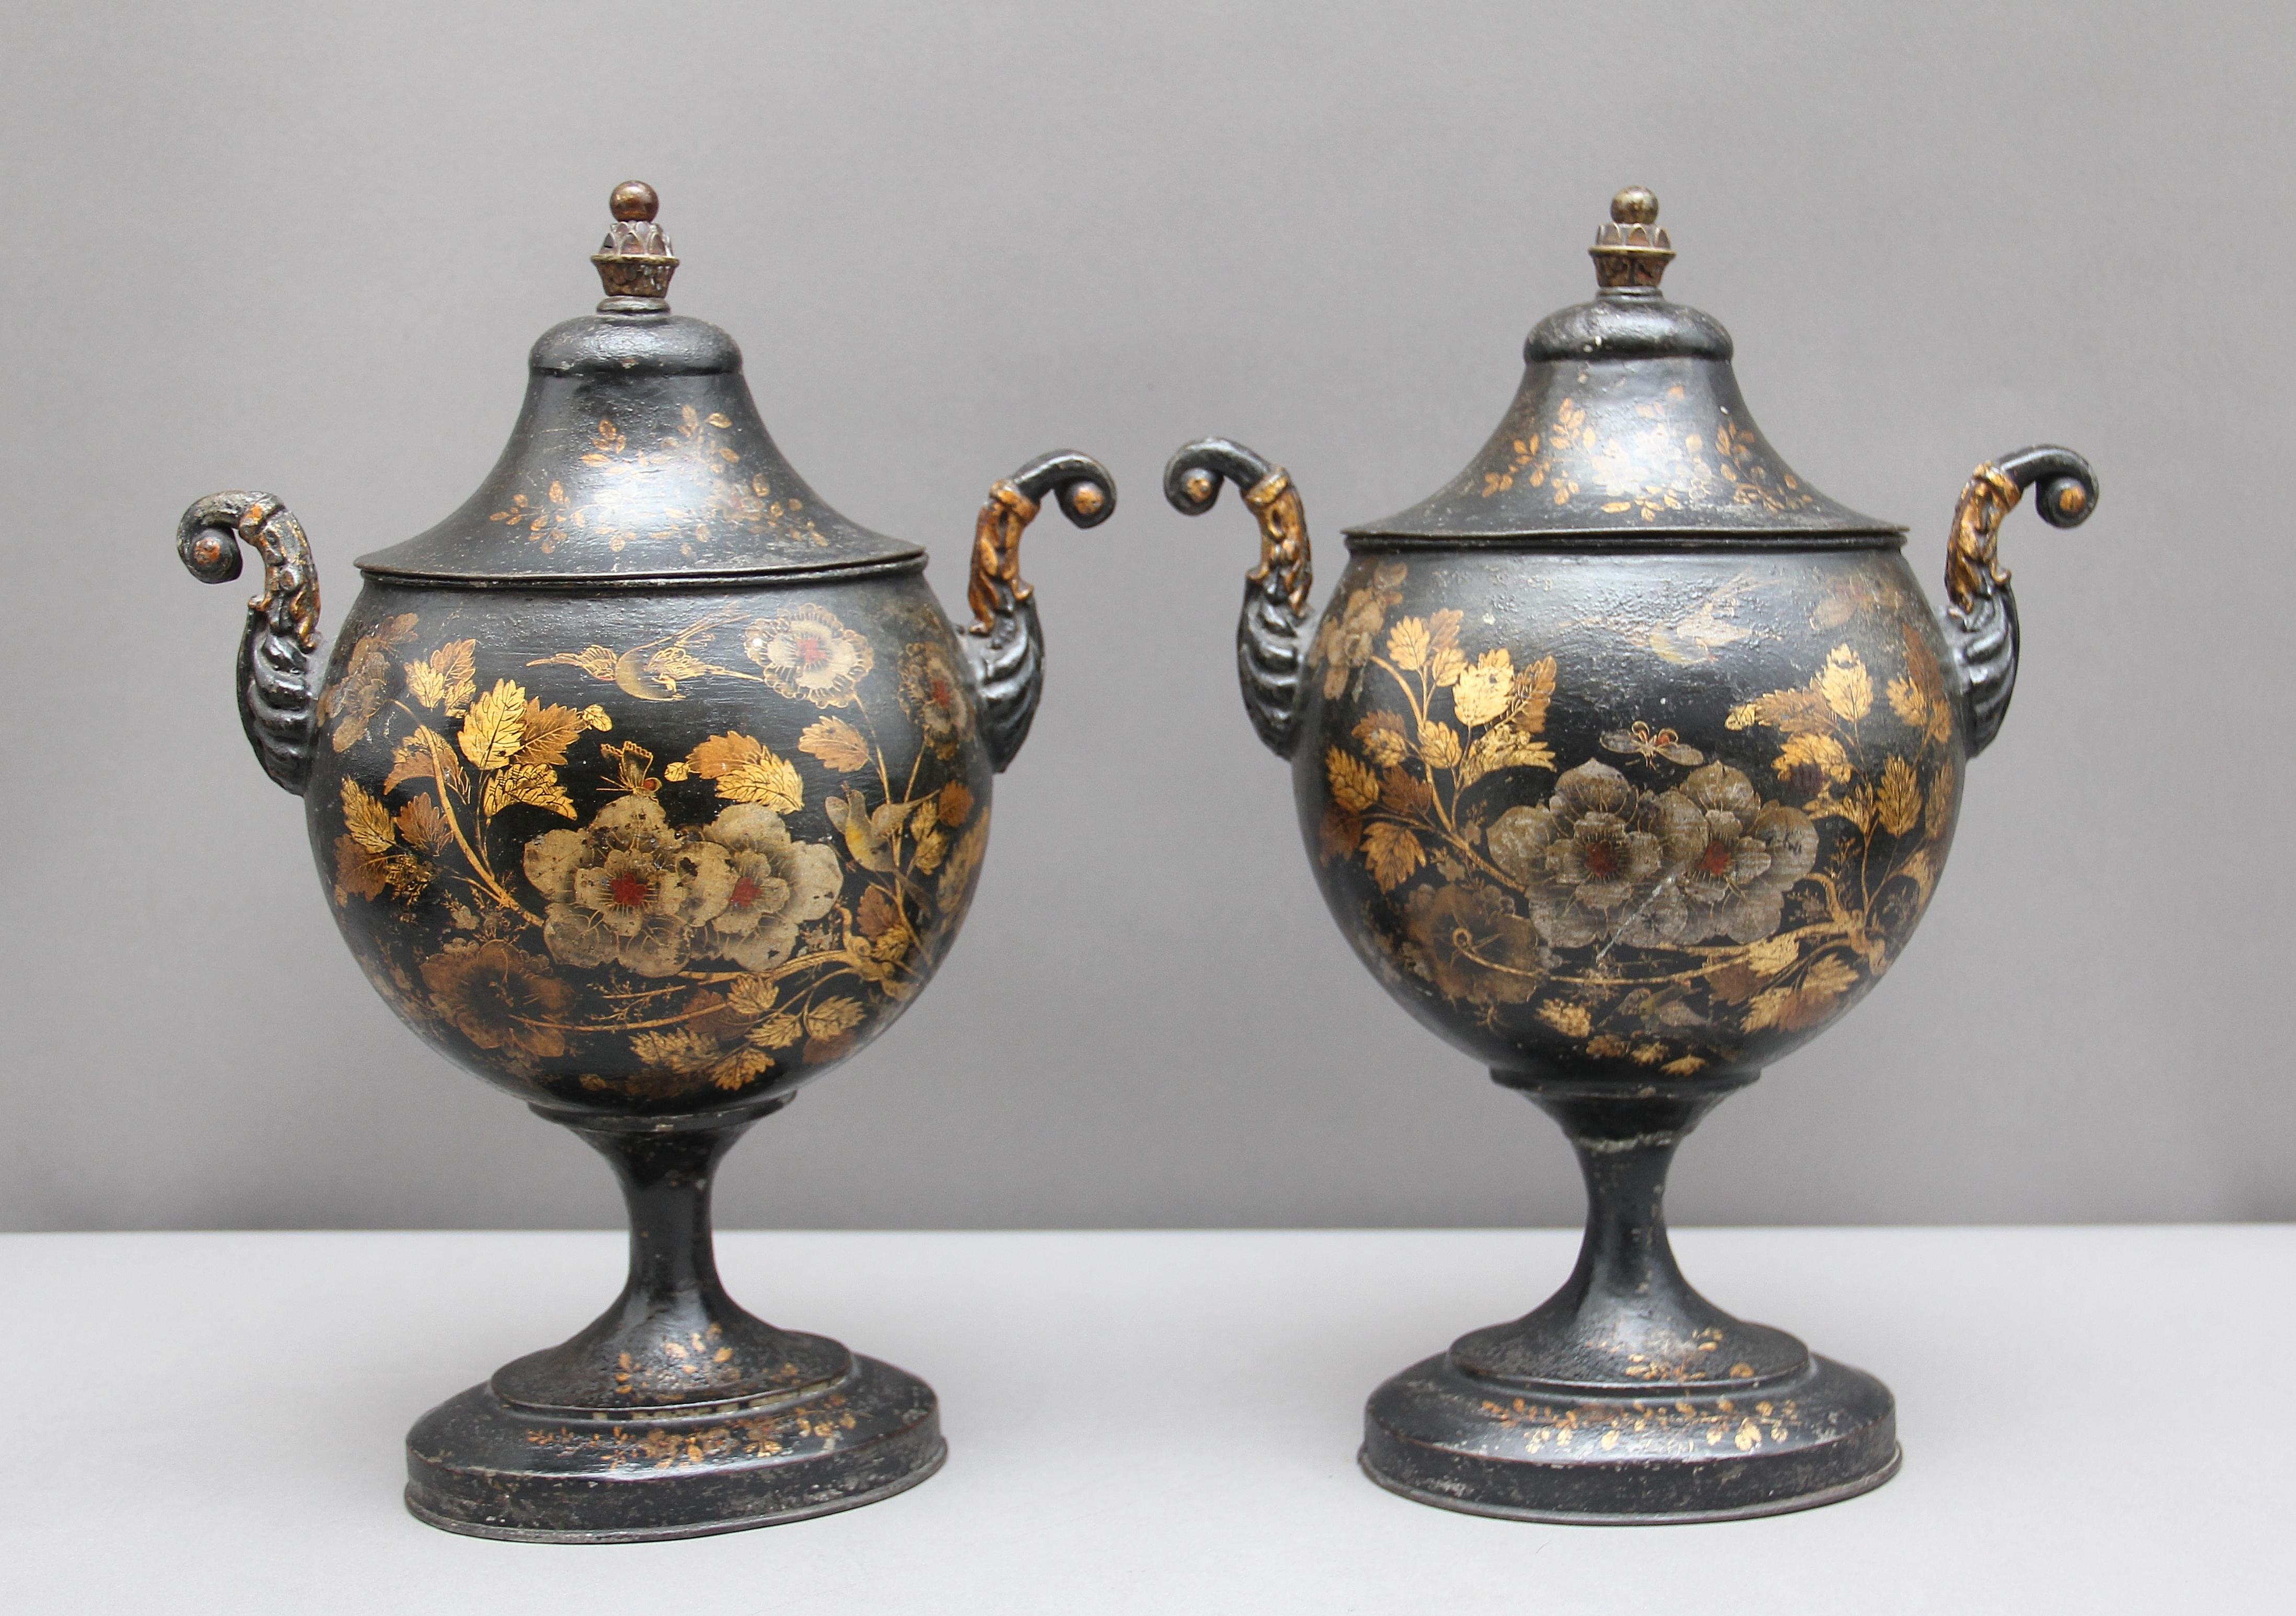 Pair of Early 19th Century Tole Chestnut Urns 1